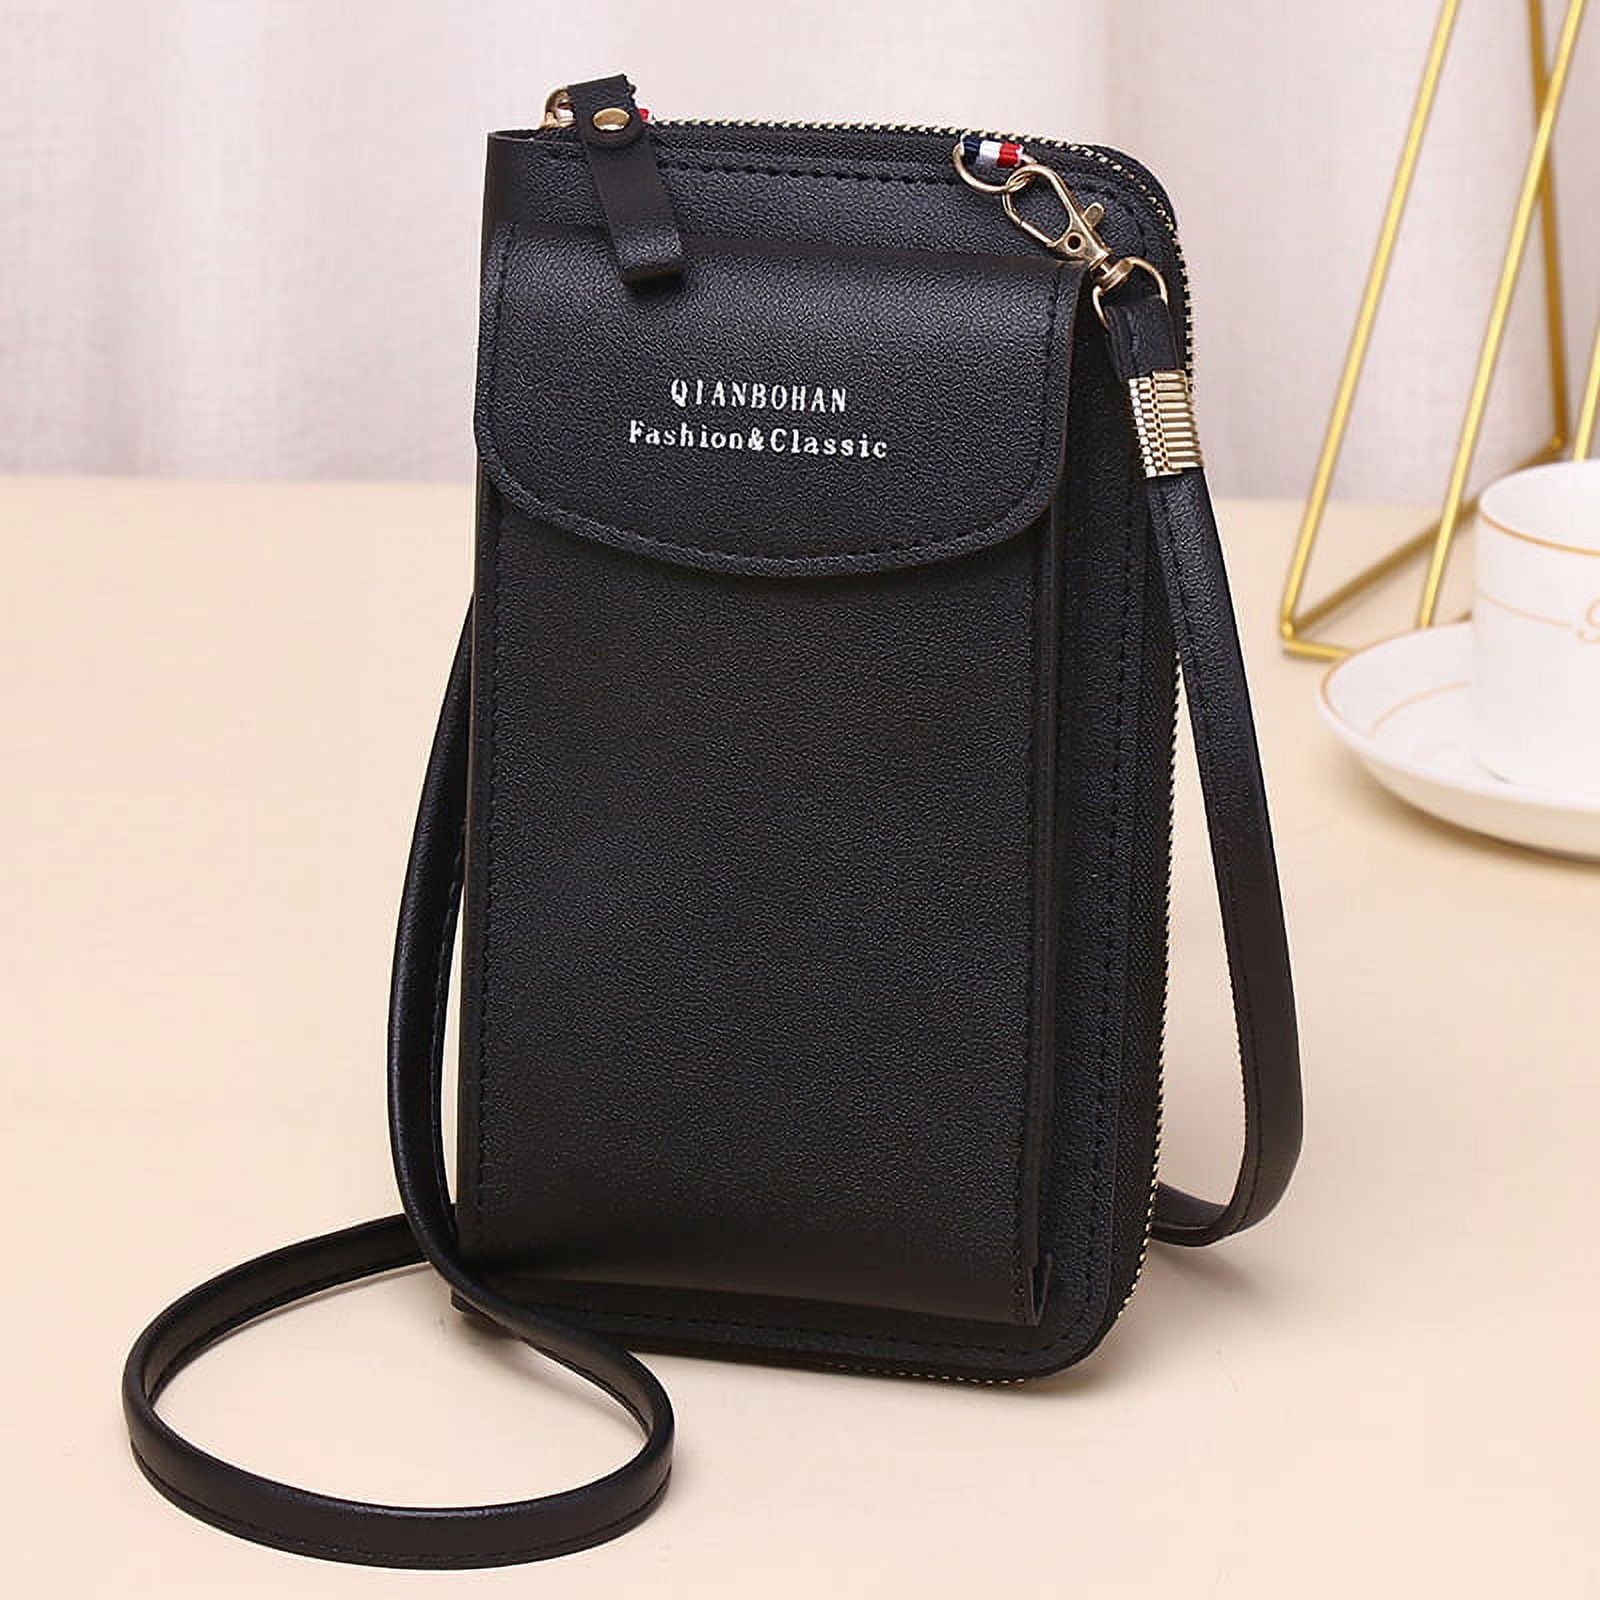 Aitbags Mini Soft PU Leather Wristlet Clutch Crossbody Bag with Chain Strap  Cell Phone Purse